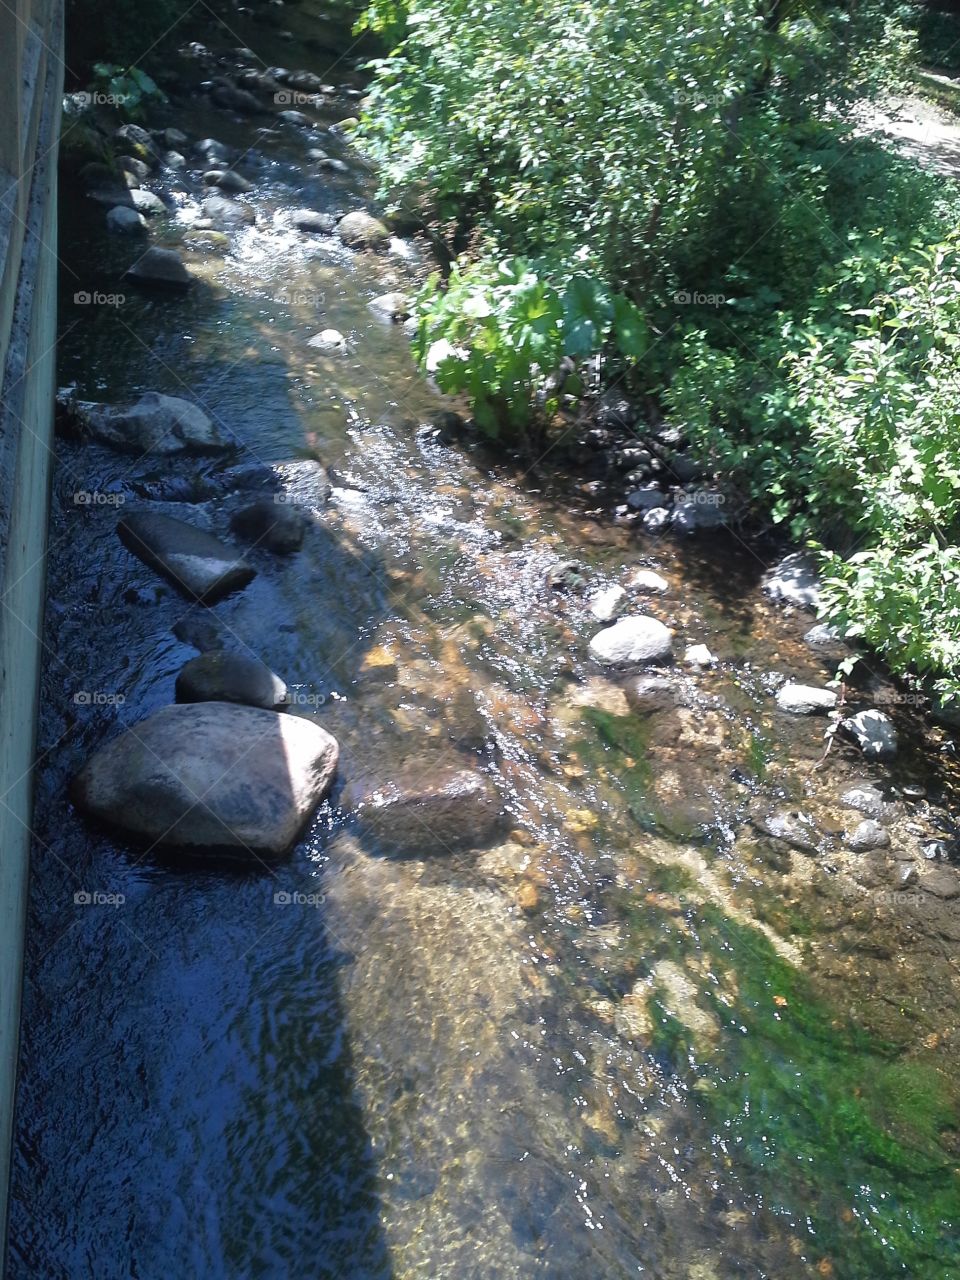 River side eating. The beautiful water flow inches away while eating.